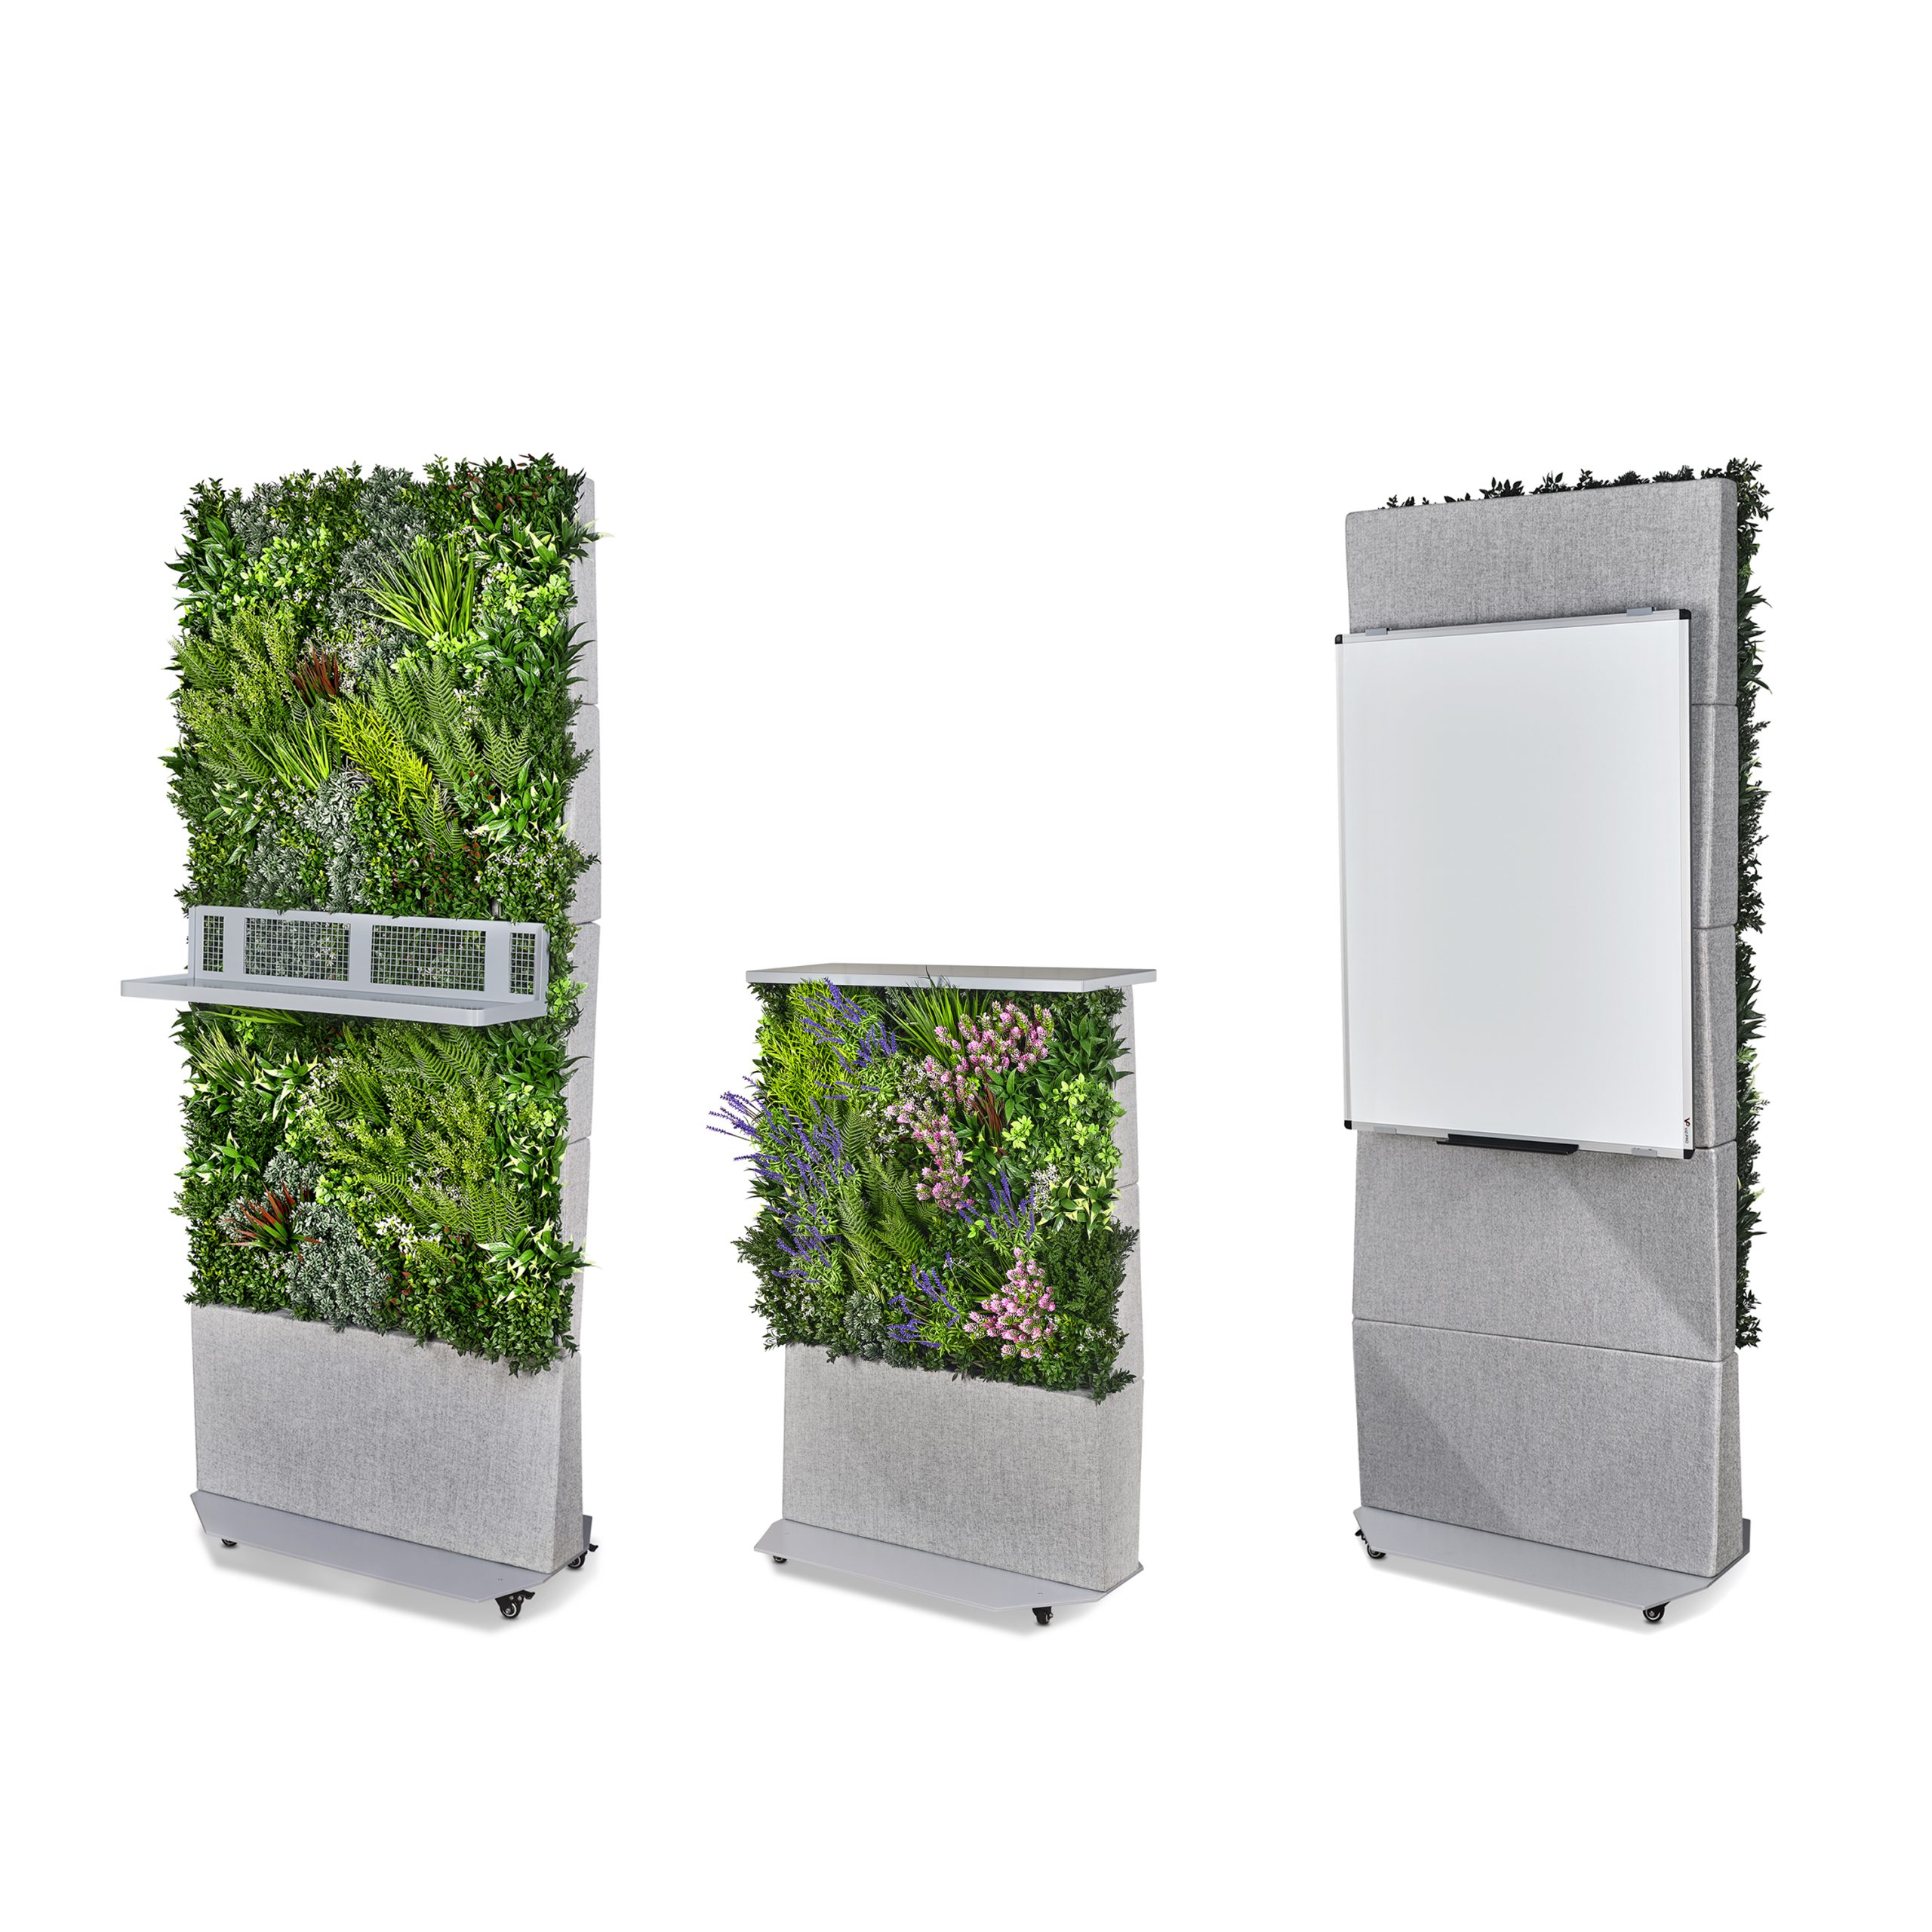 Functional Green Walls for Offices